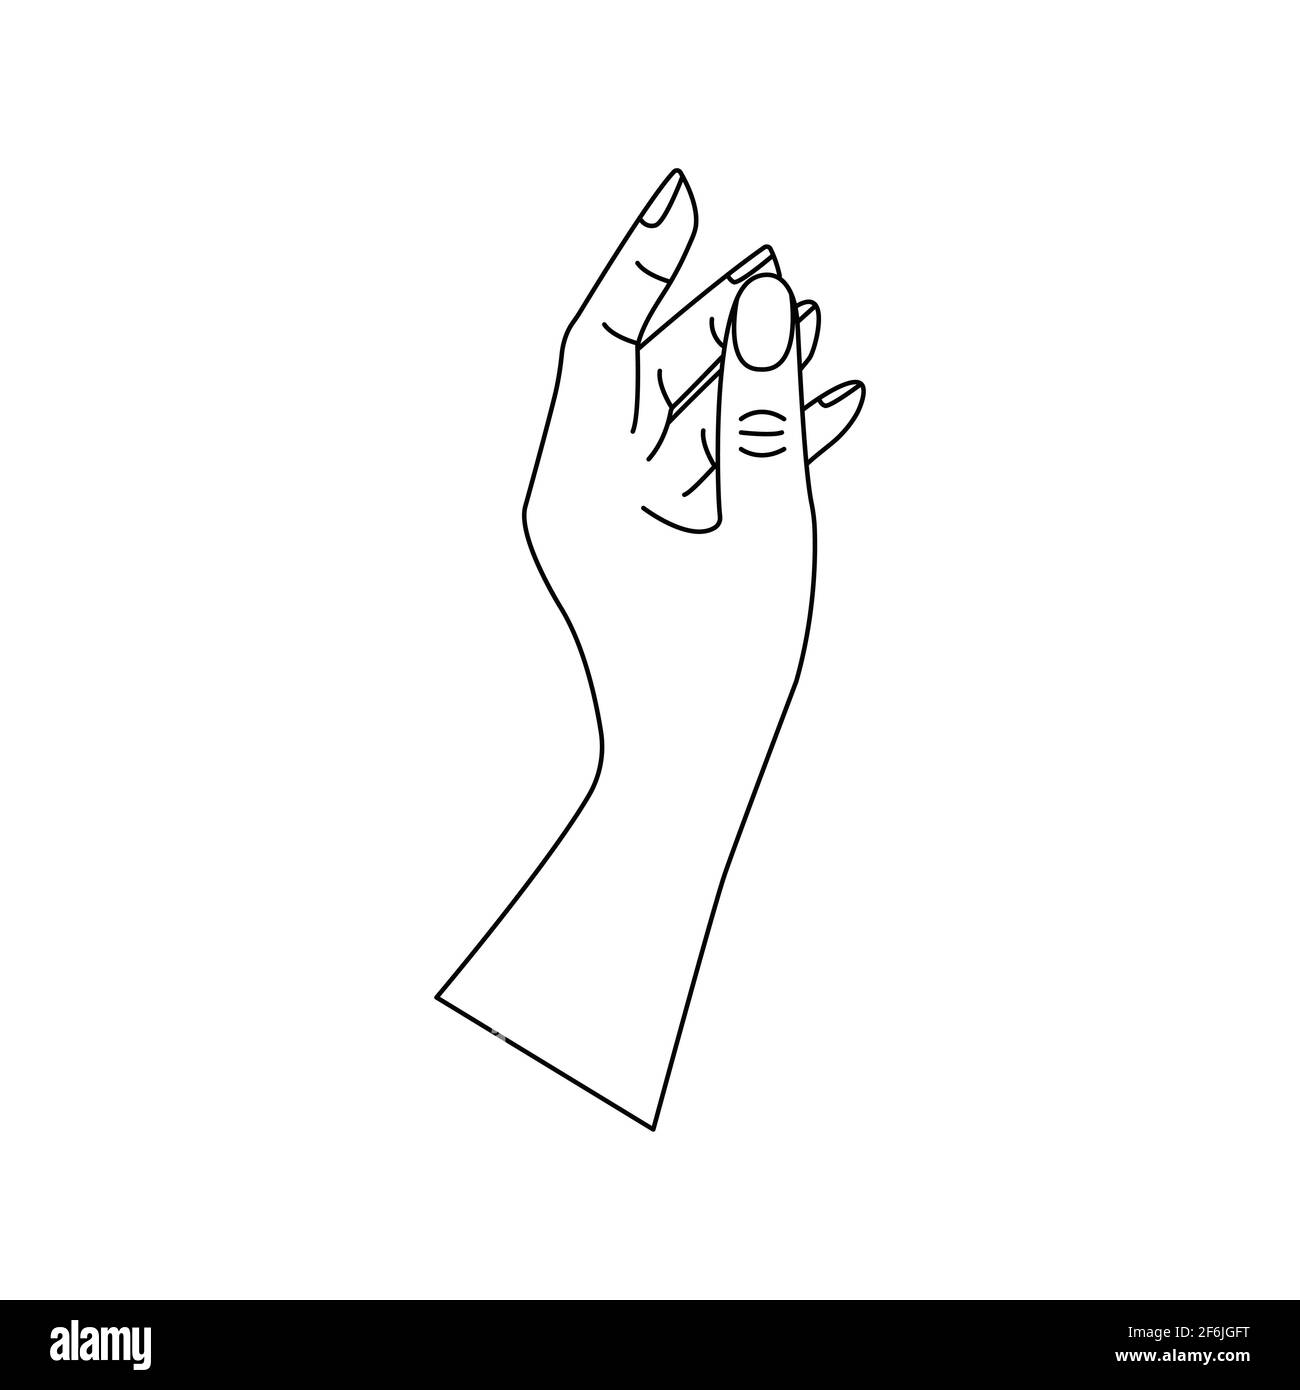 Human hand to the wrist, gesturing. Linear vector black and white ...